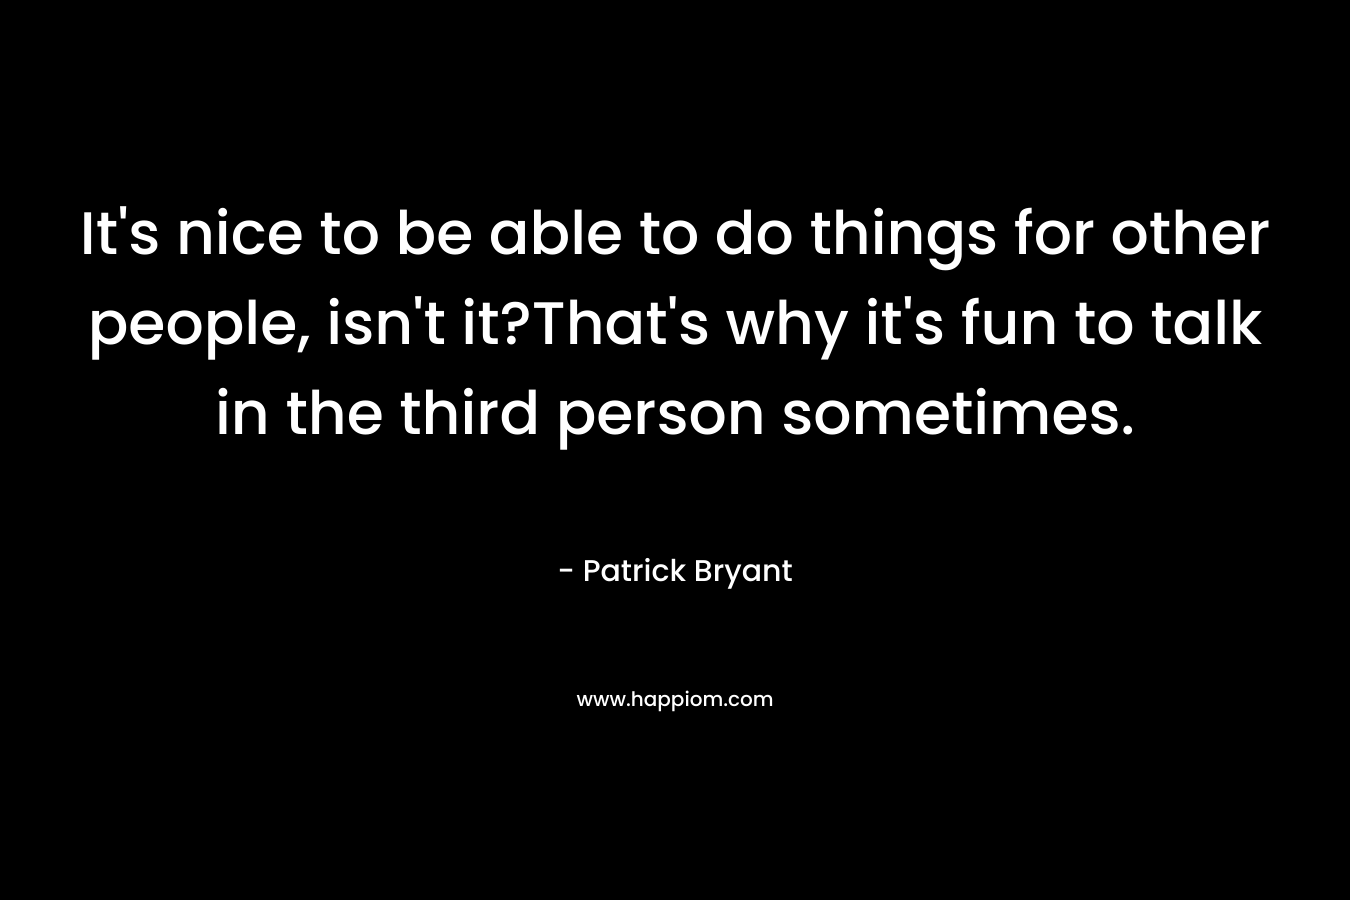 It’s nice to be able to do things for other people, isn’t it?That’s why it’s fun to talk in the third person sometimes. – Patrick Bryant